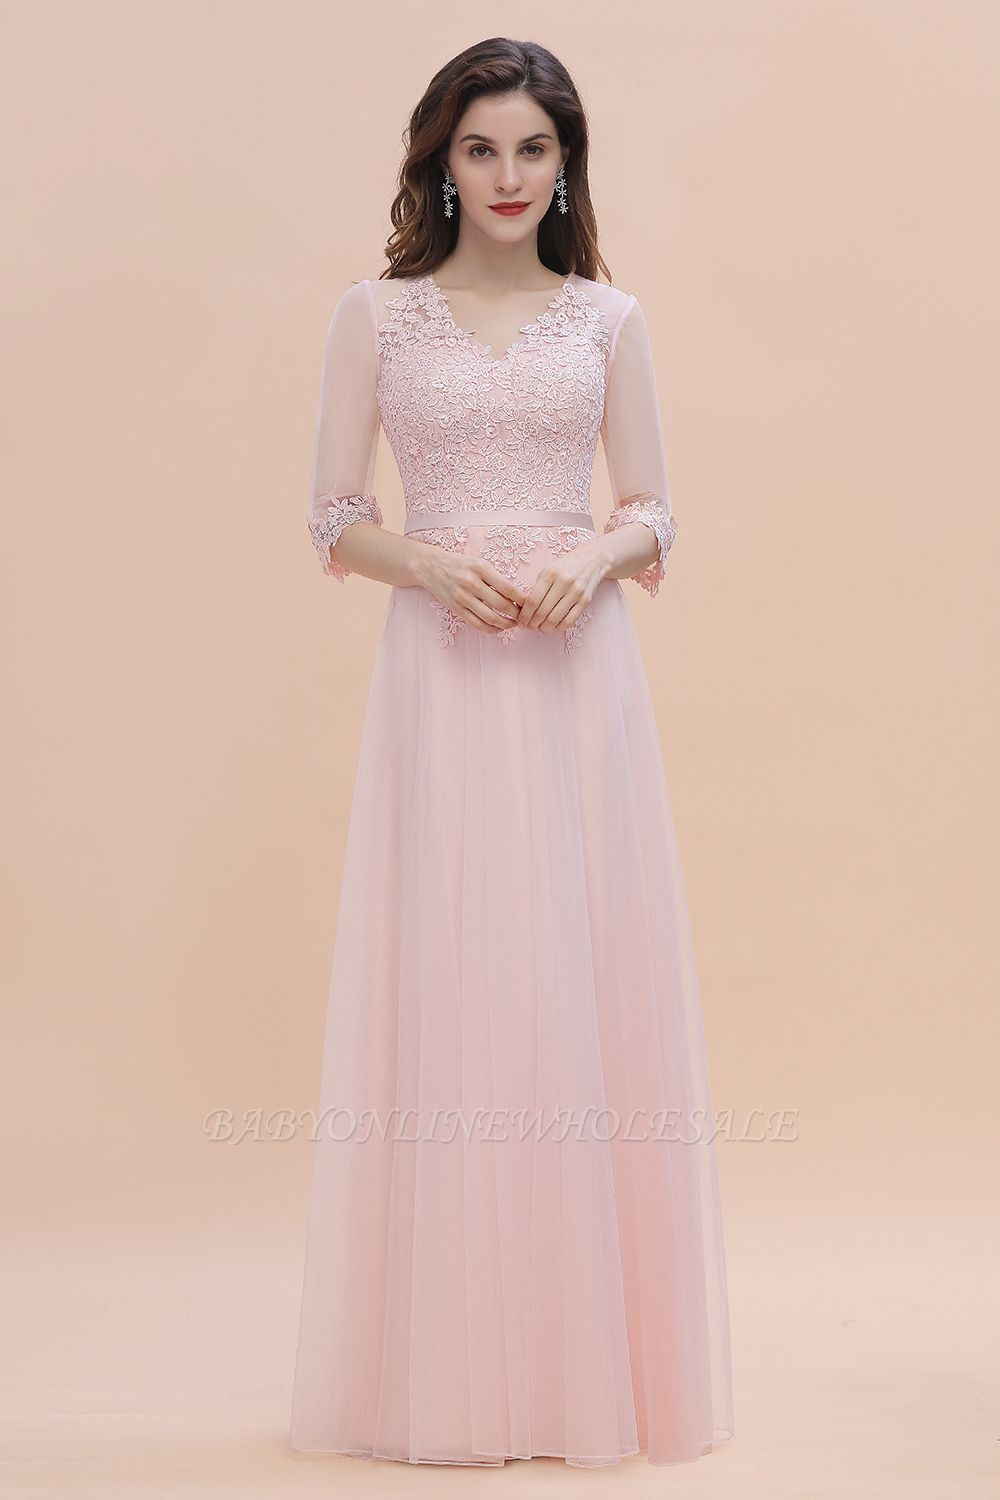 Romantic 3/4 Sleeves Pink Wedding Guest Dress Lace Appliques